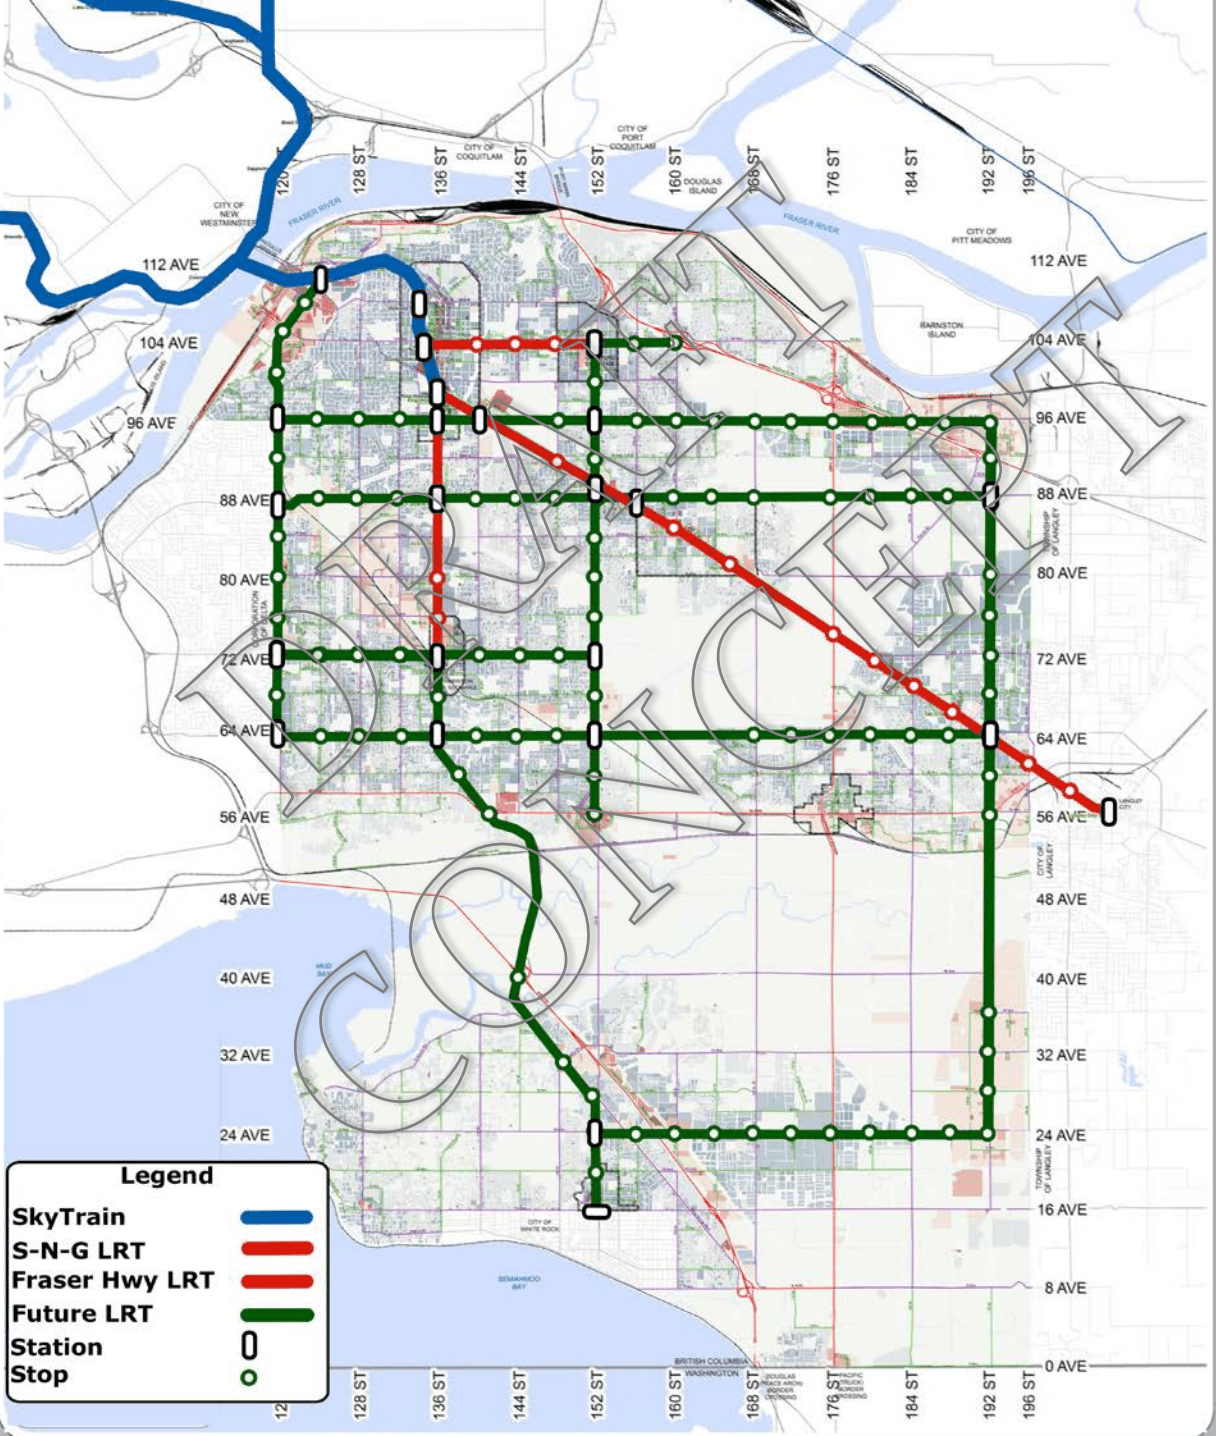 Map Of Surrey LRT Shows 150 KM Of Light Rail On Grid Network